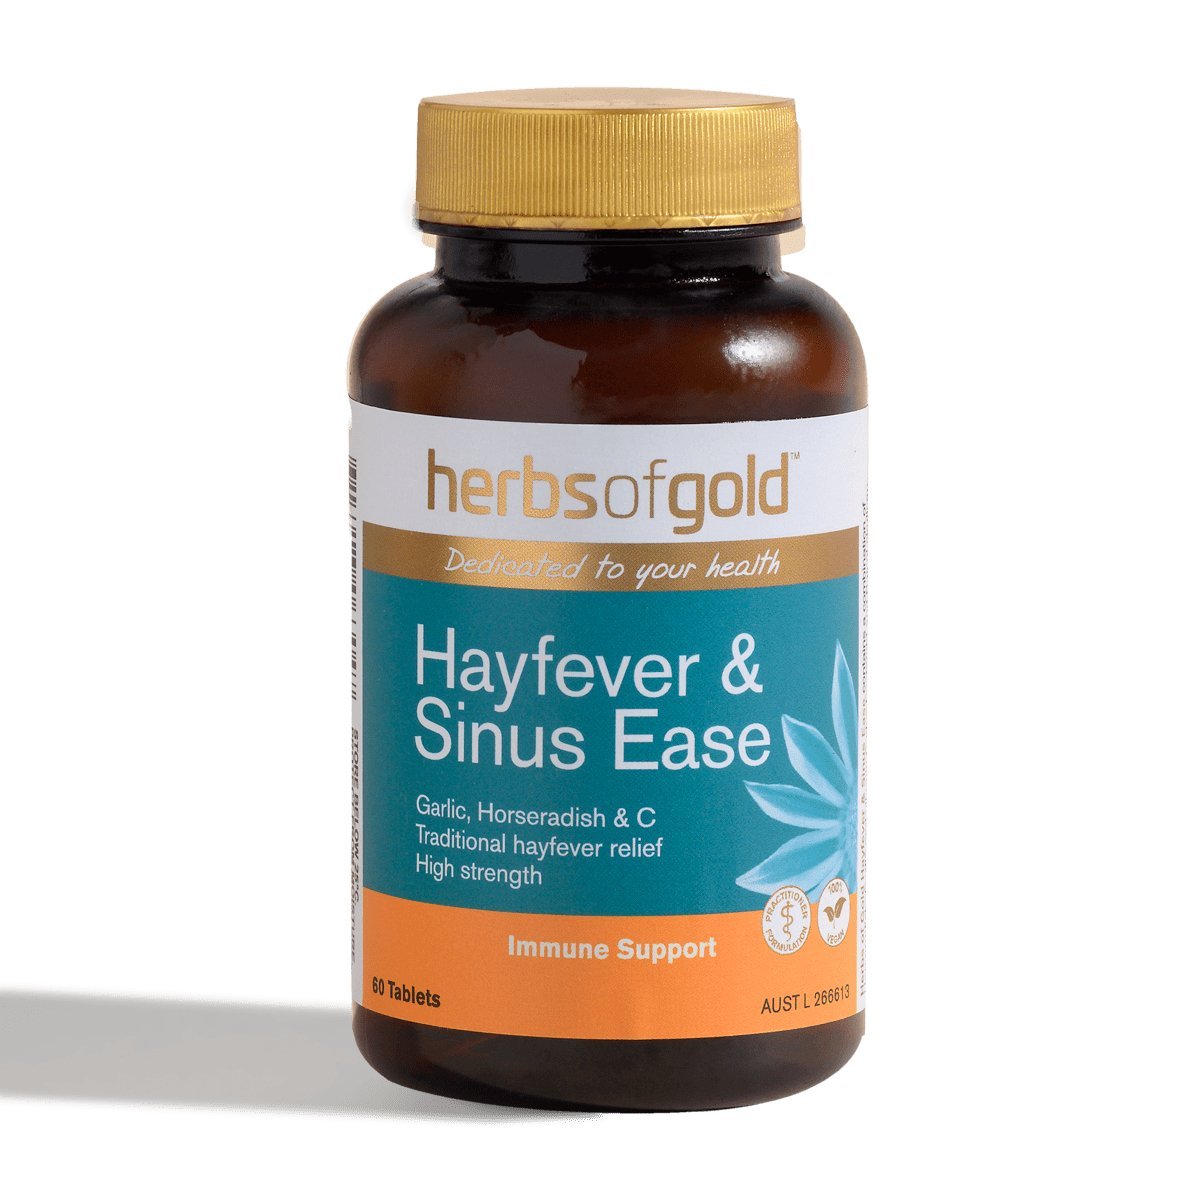 Herbs of Gold Hayfever & Sinus Ease - Dr Earth - Supplements, Immunity